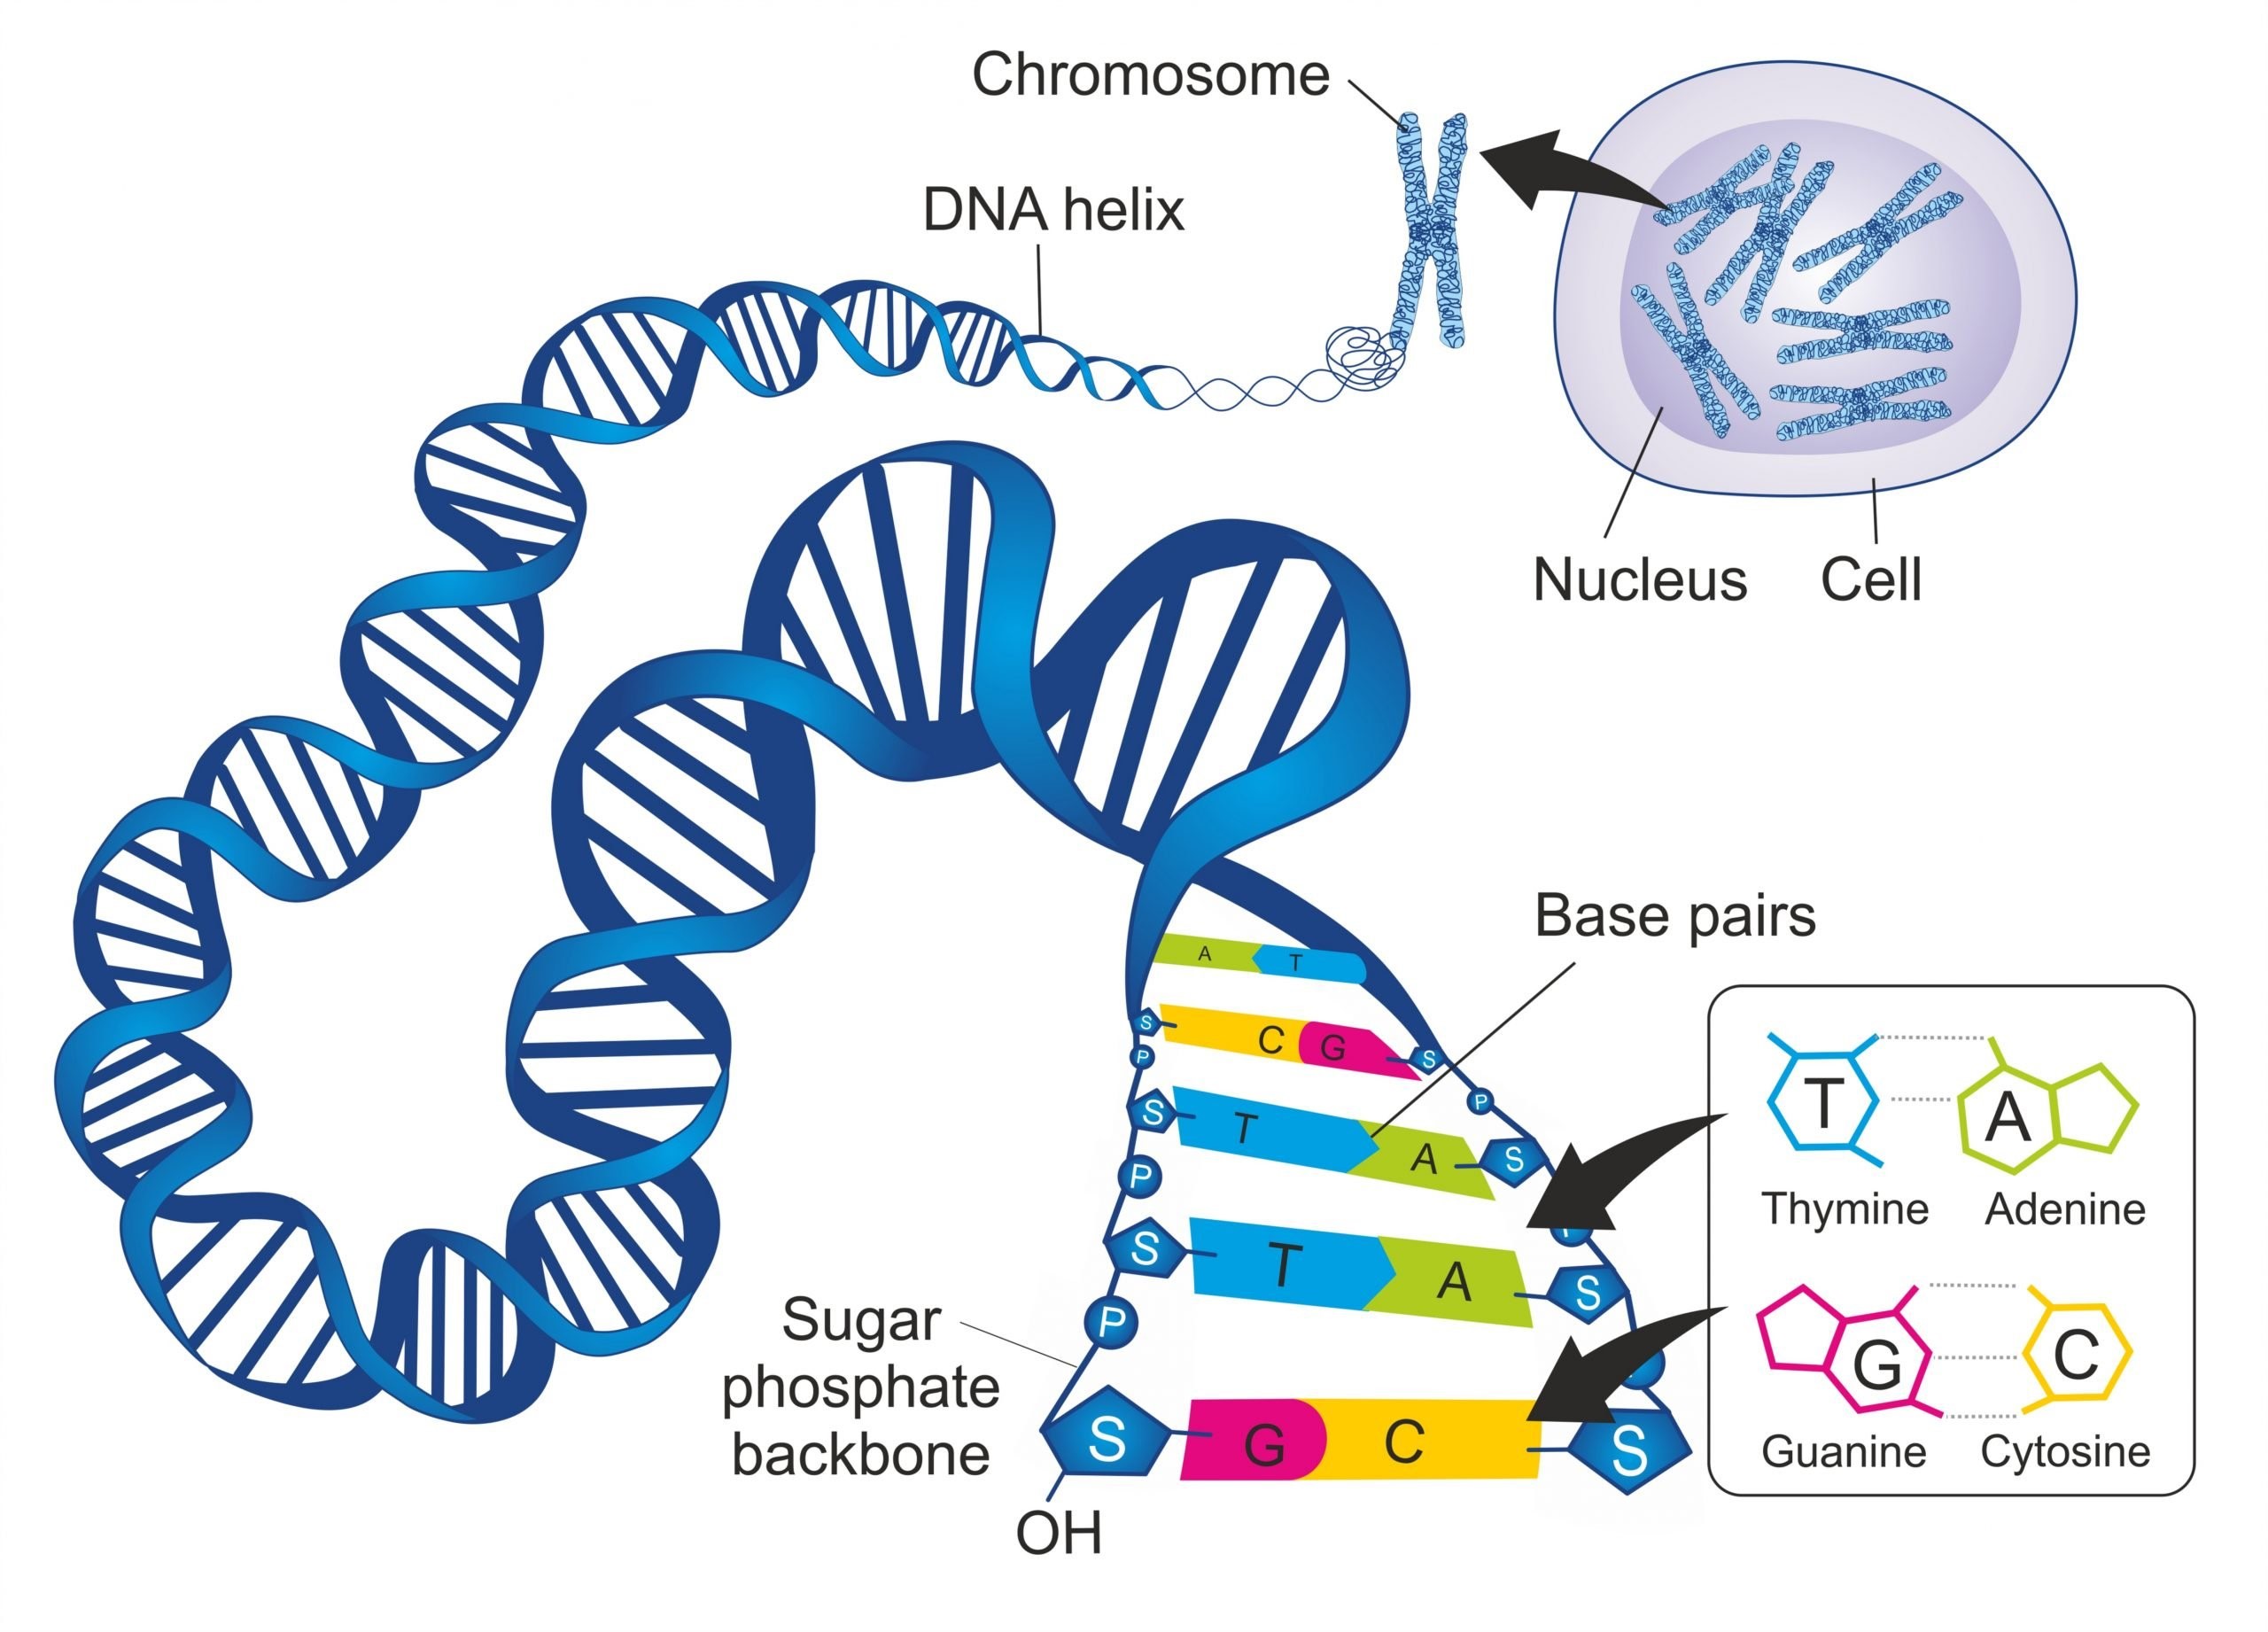 A concept image explaining the breakdown of a chromosome to the DNA base pairs